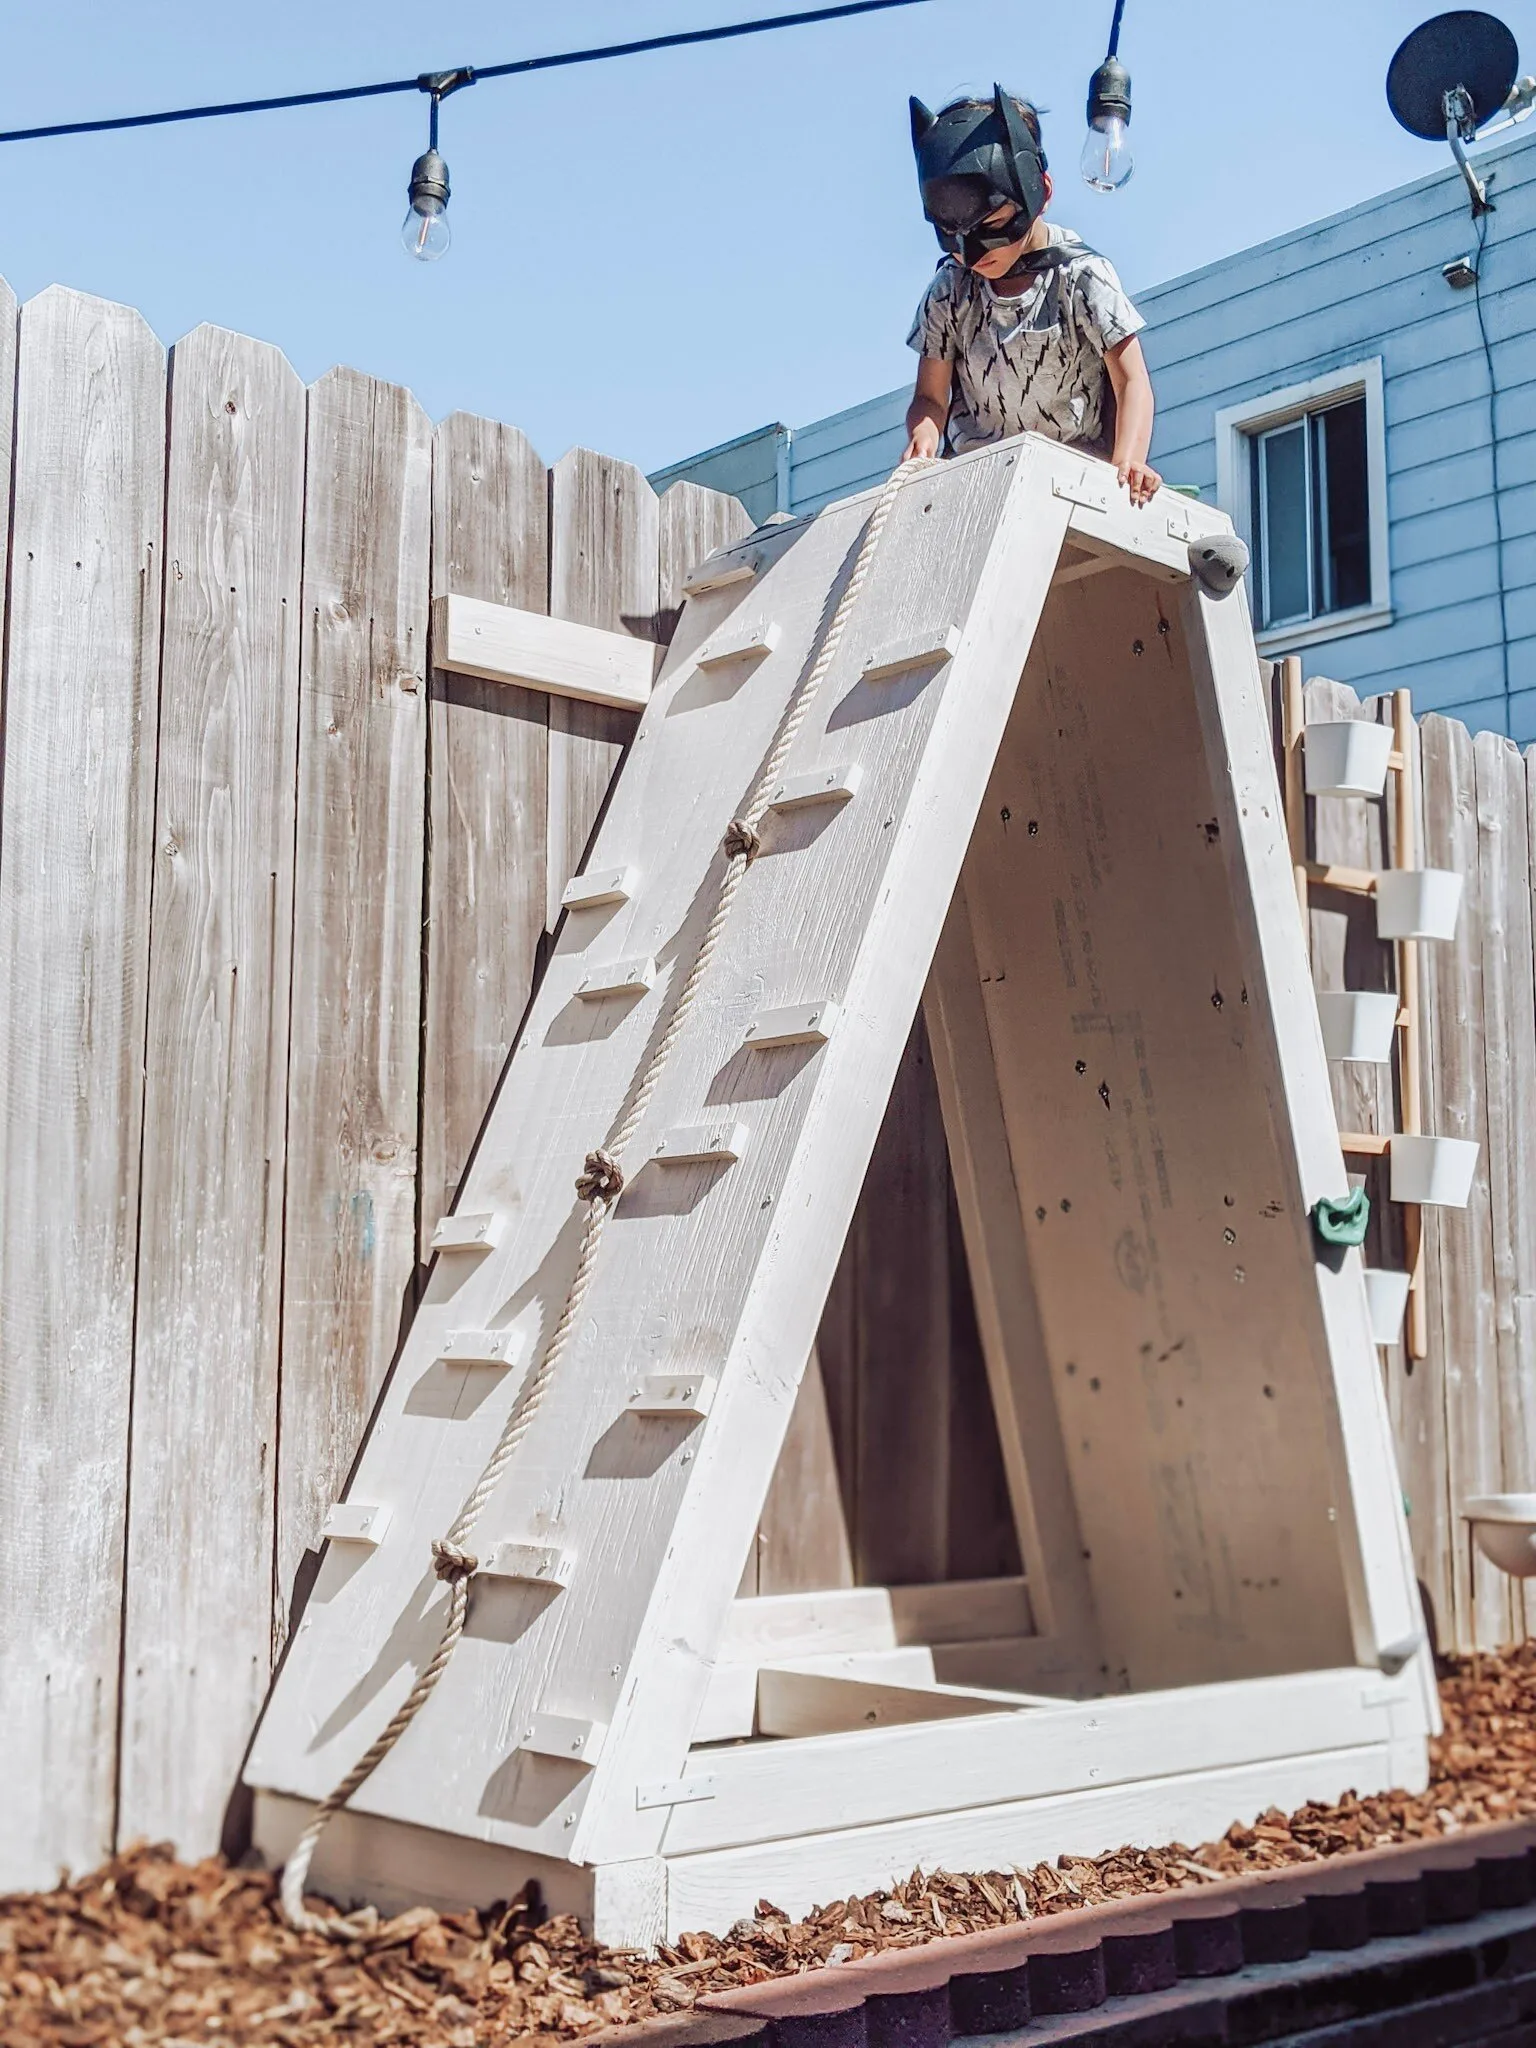 DIY Climbing Structure and Sand Box